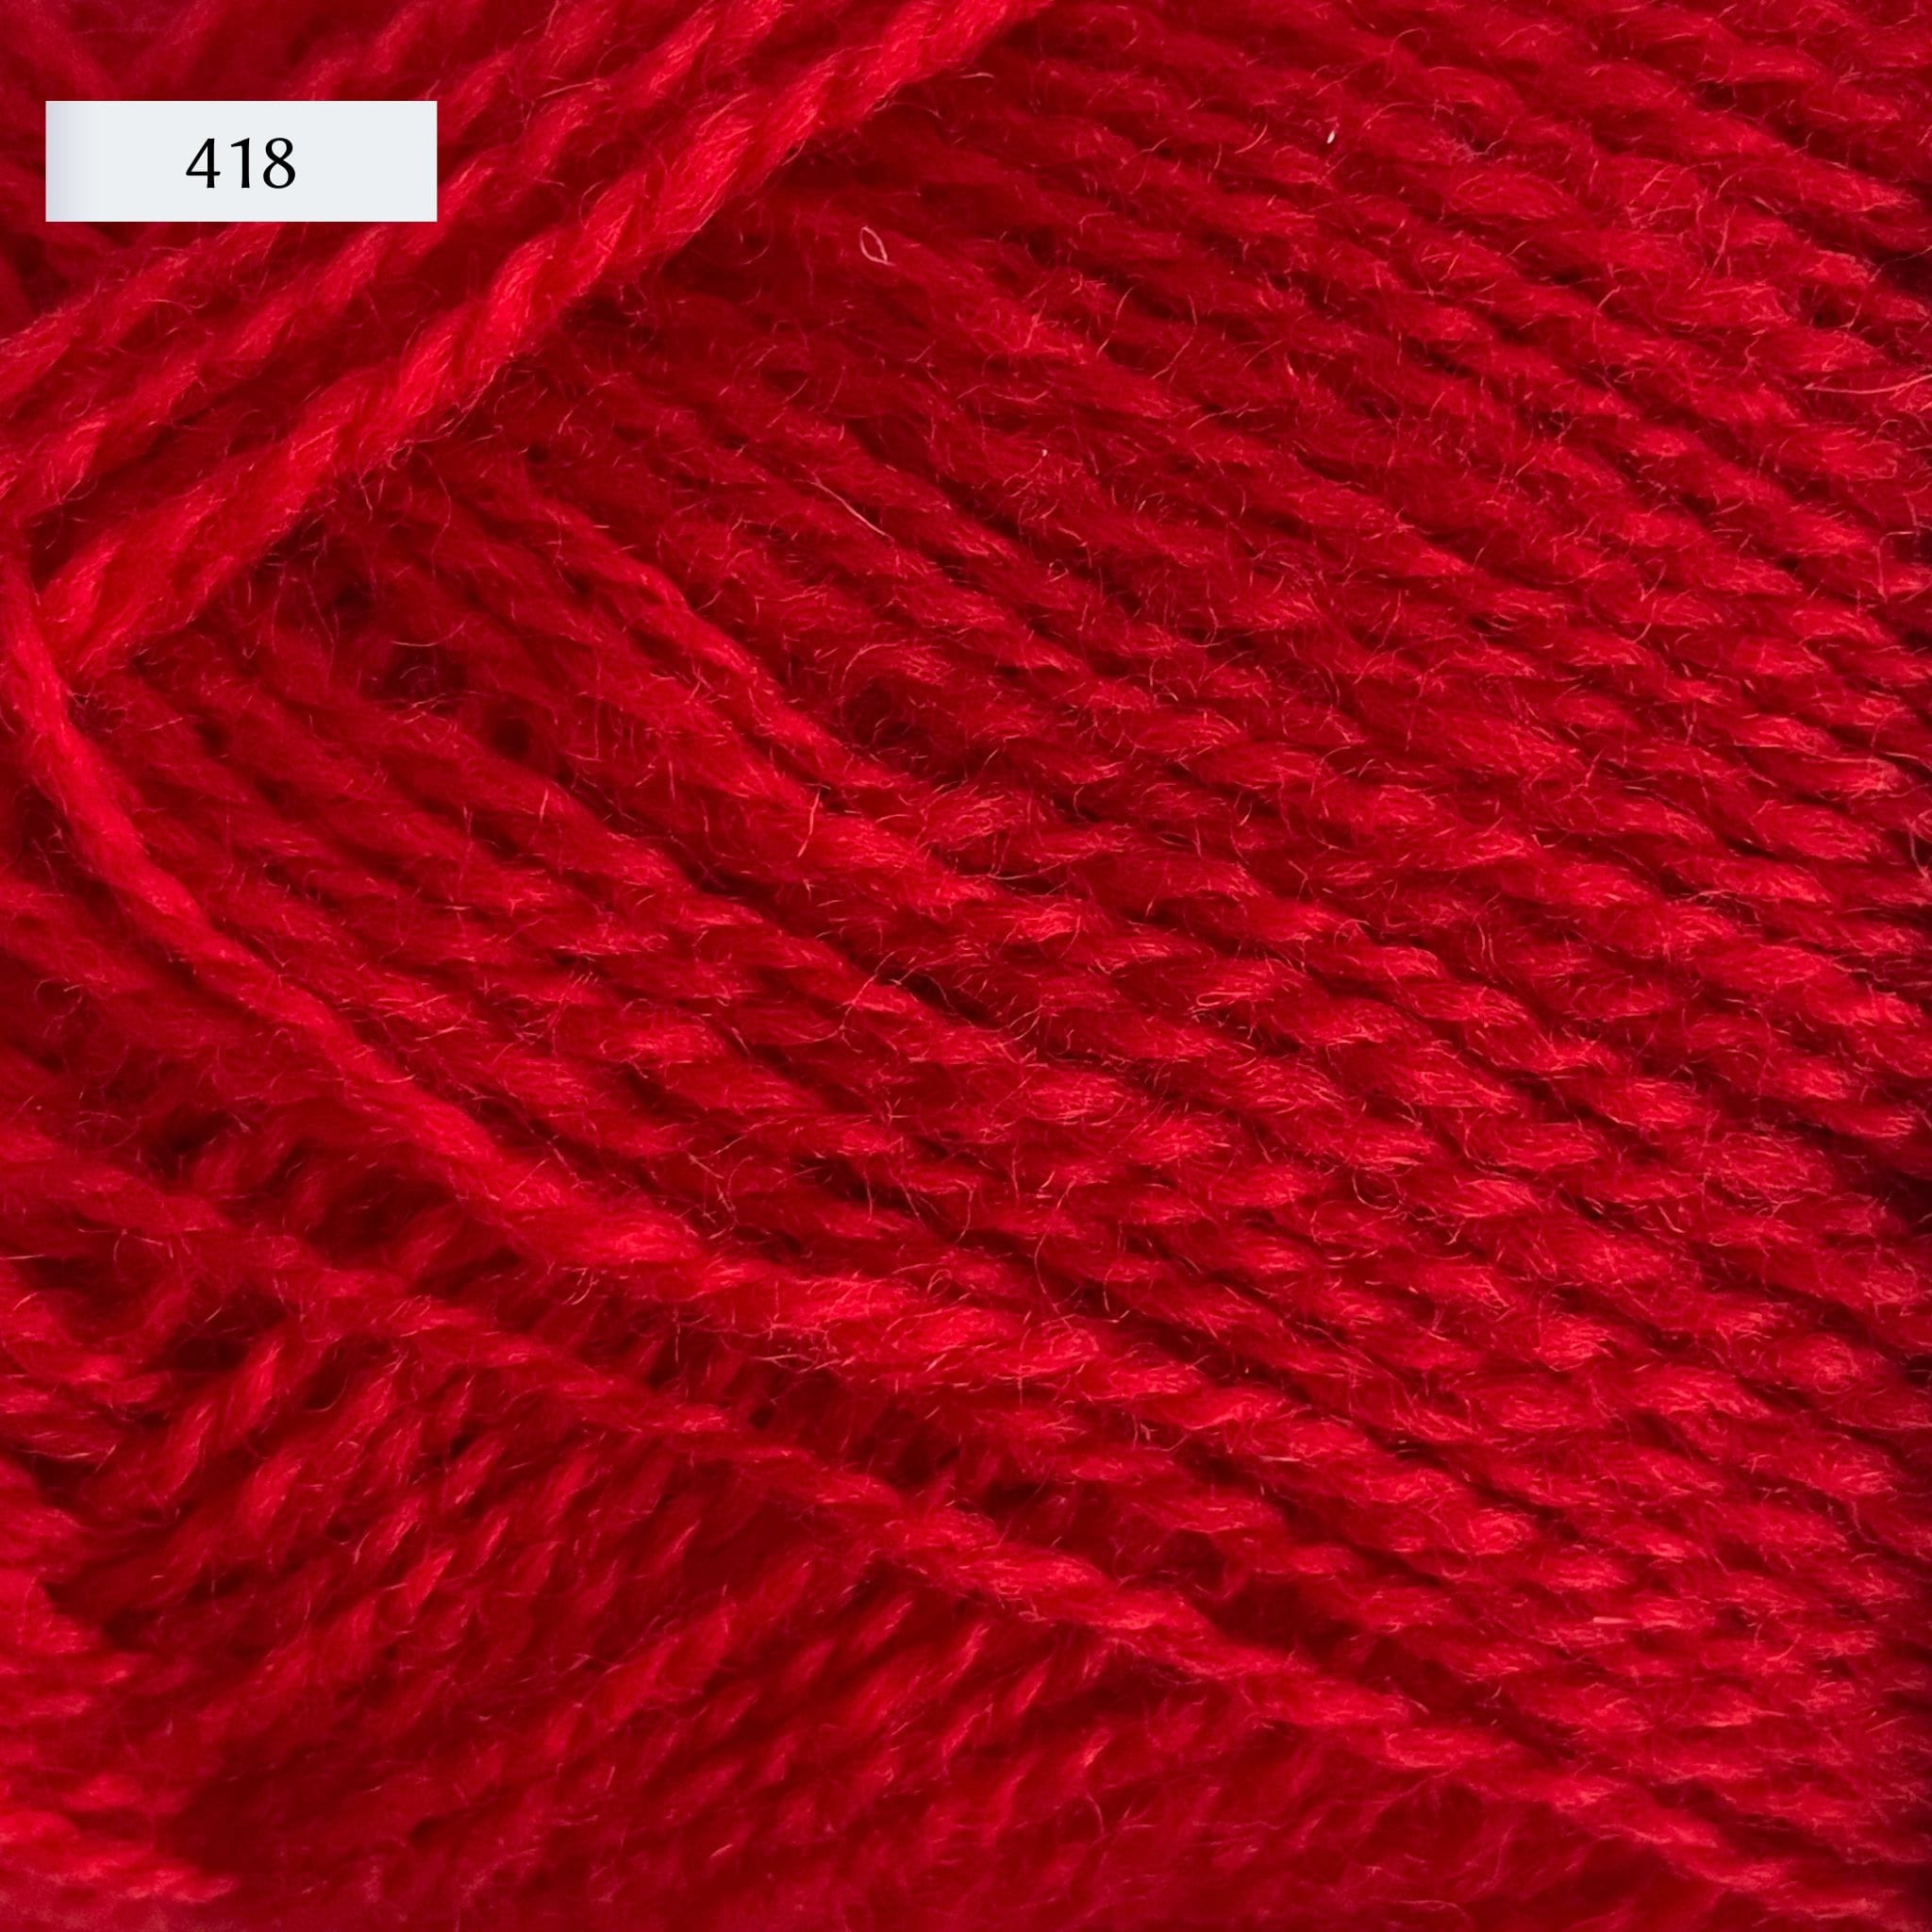 Rauma Finullgarn, a fingering/sport weight yarn, in color 418, a bright primary red